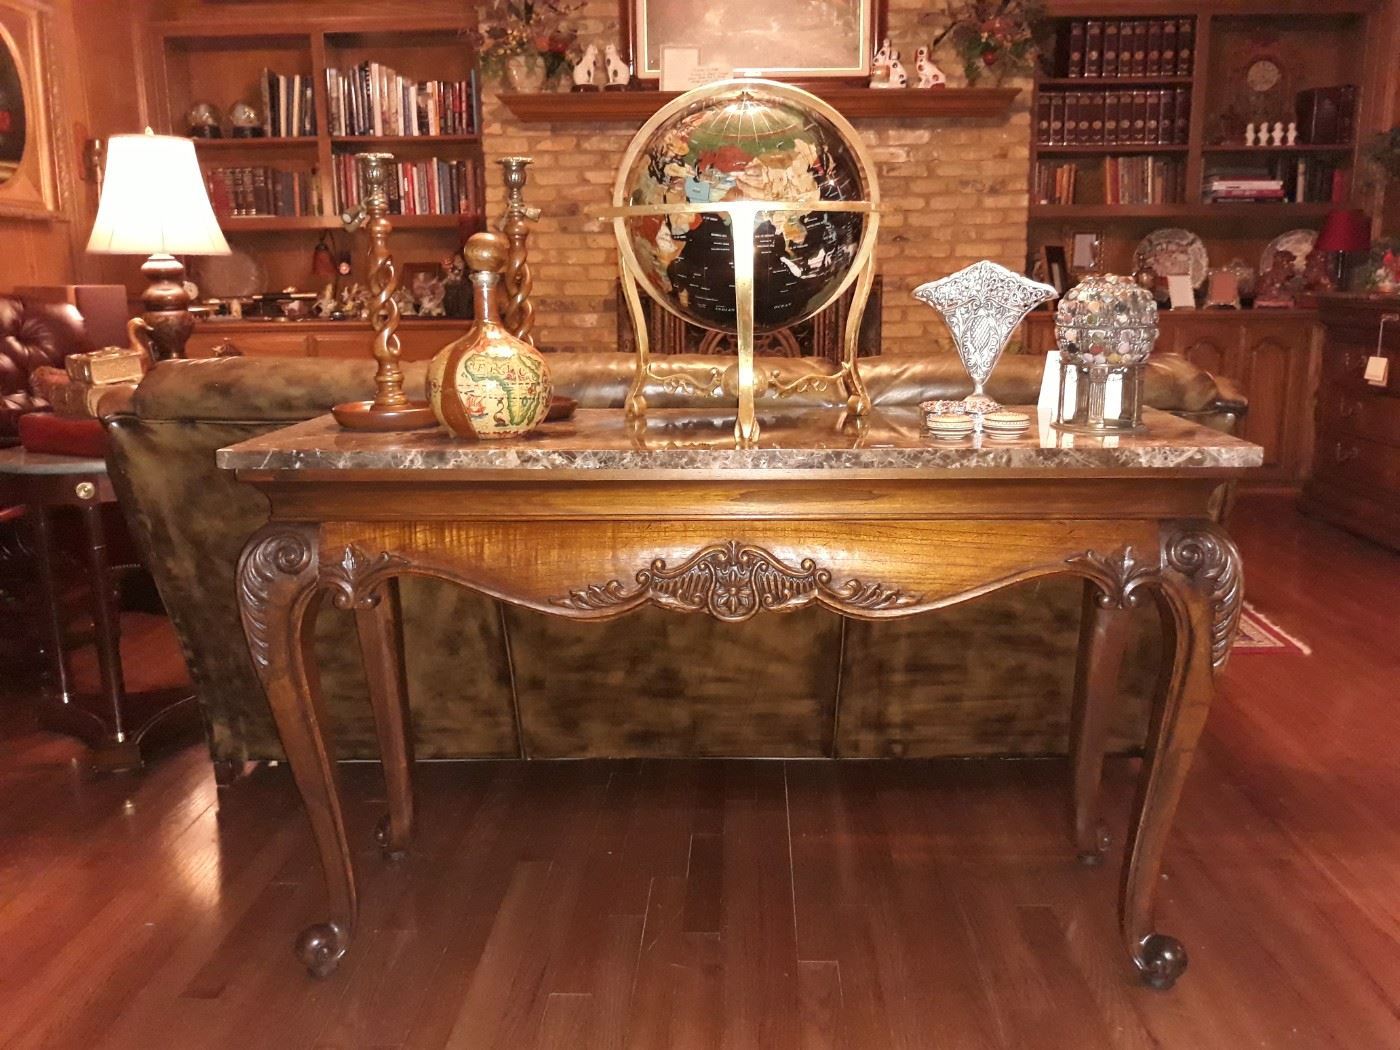 Many beautiful high end traditional furniture and decor from this Heikman console table, lapis globe on brass stand, leather wrapped bottle, barley twist candle holders, and more.